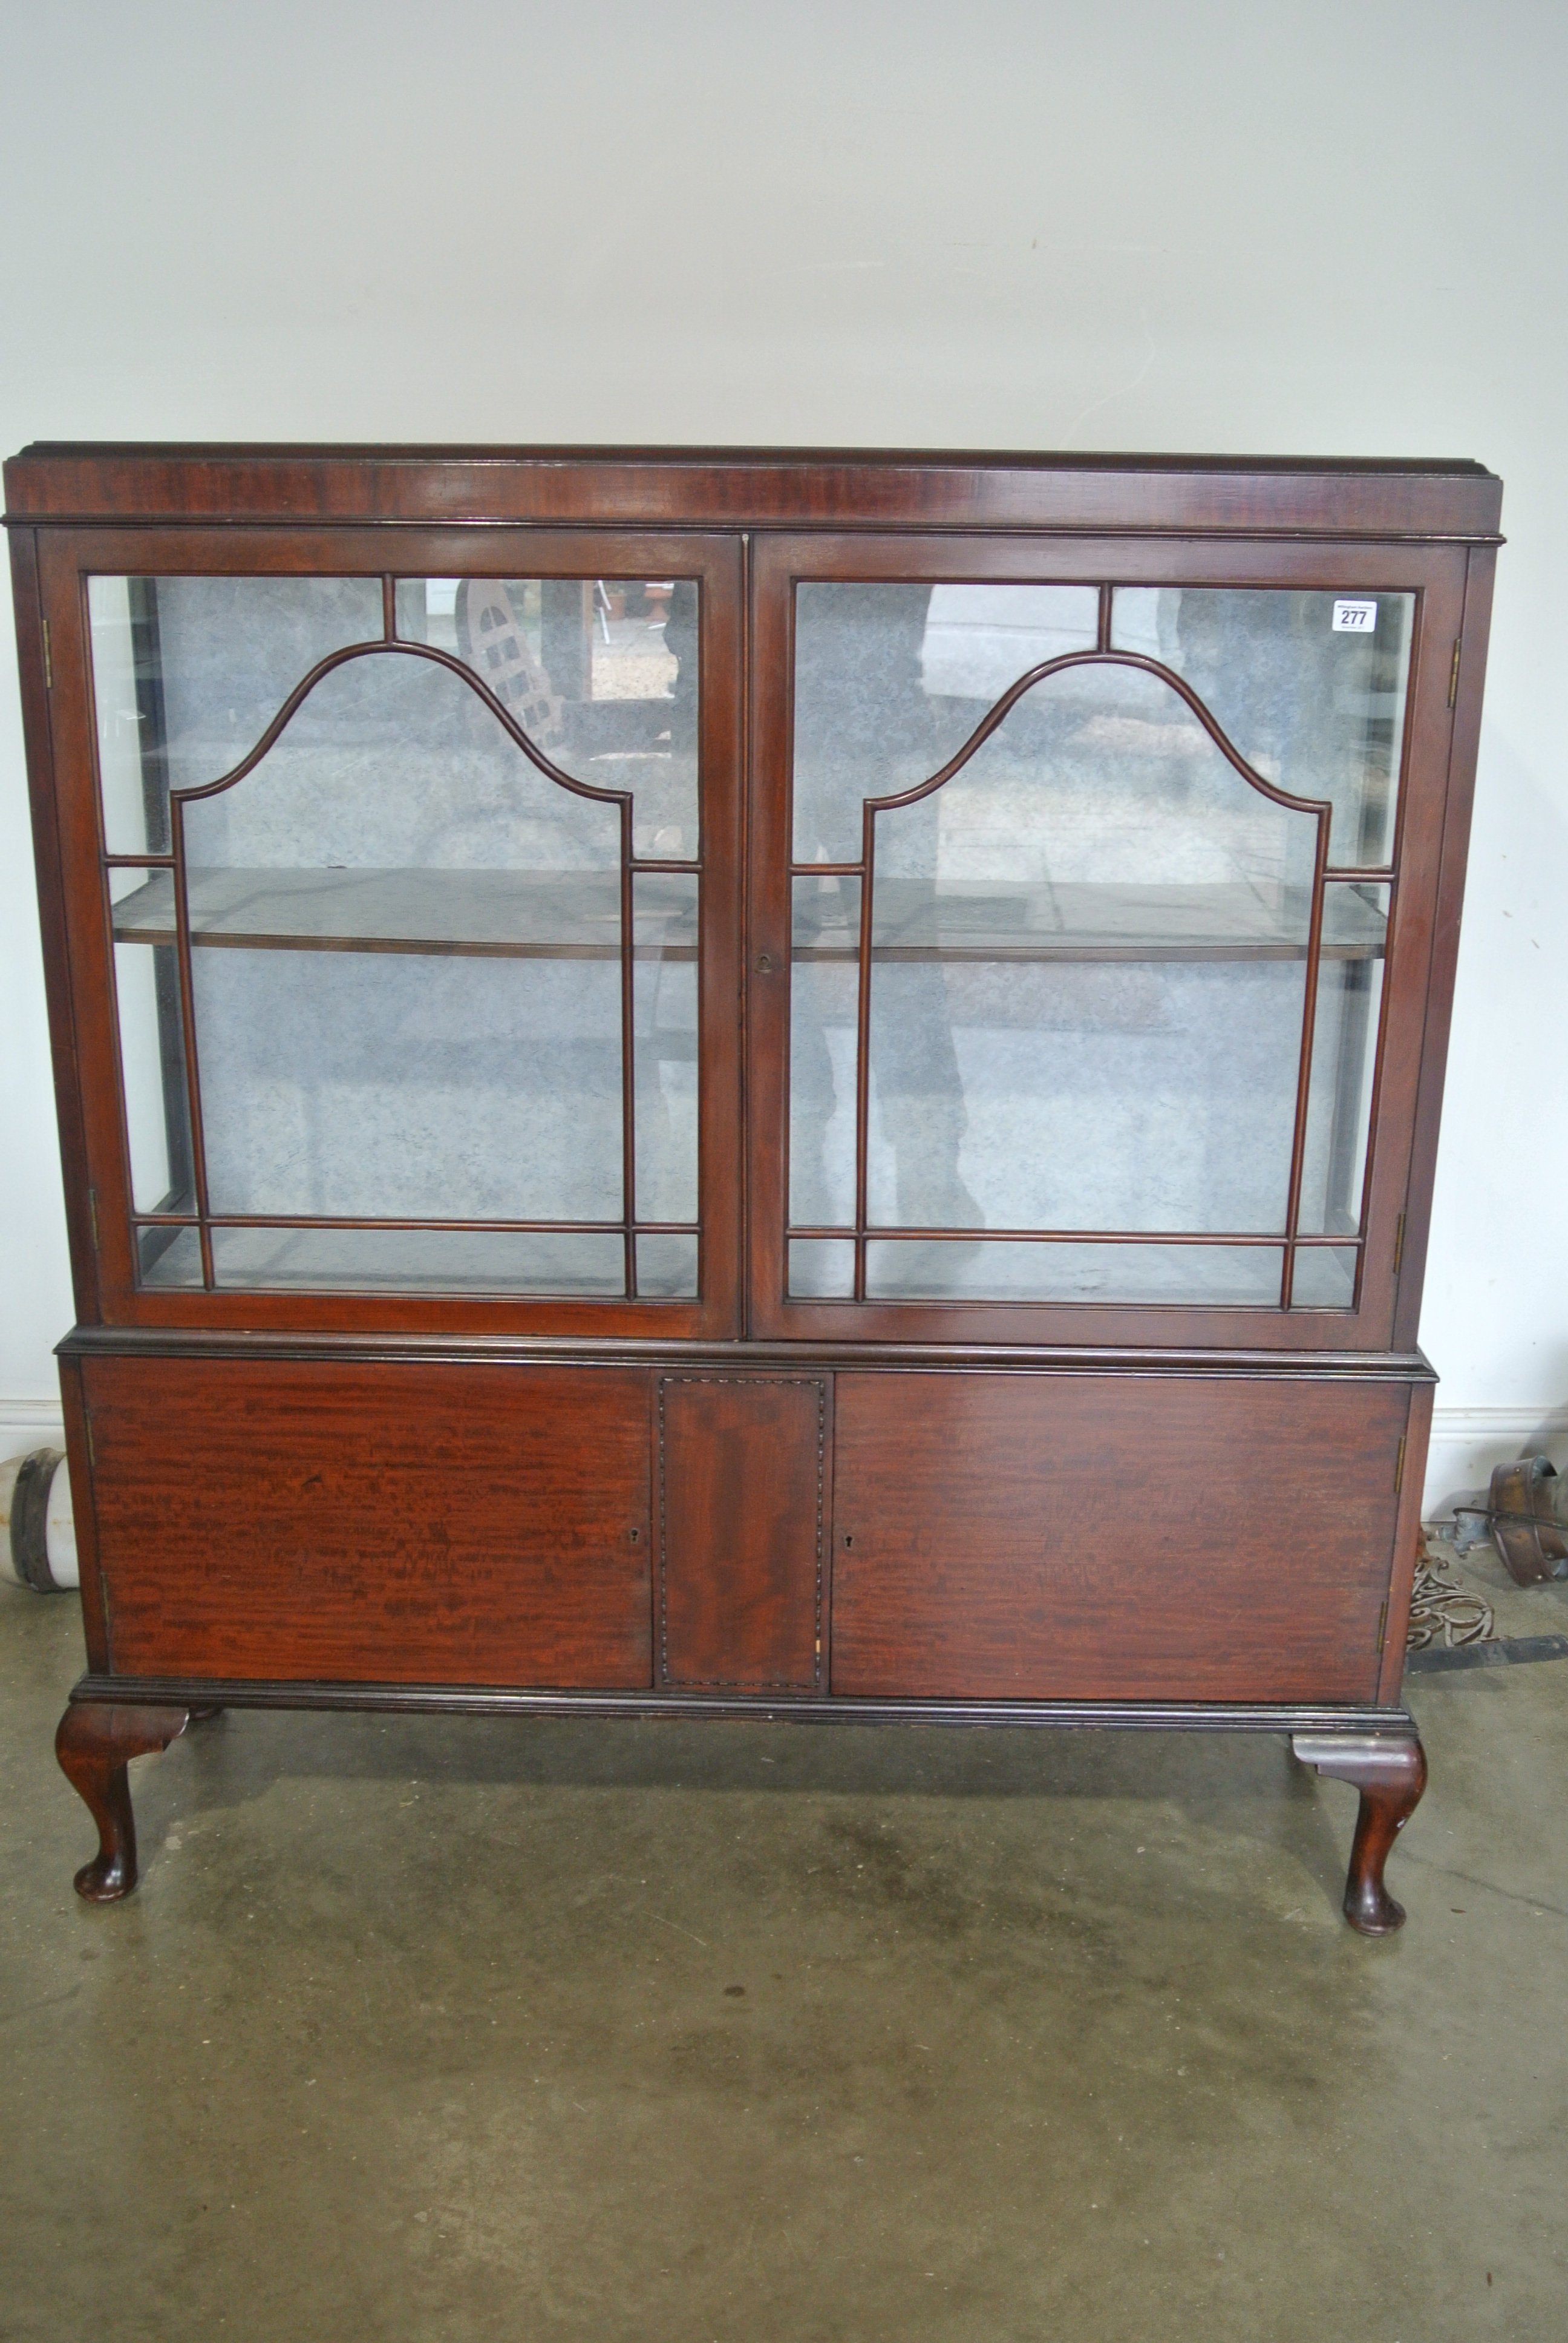 An Edwardian Mahogany Display Cabinet - 126 cm tall x 122 cm x 36 cm - in clean condition